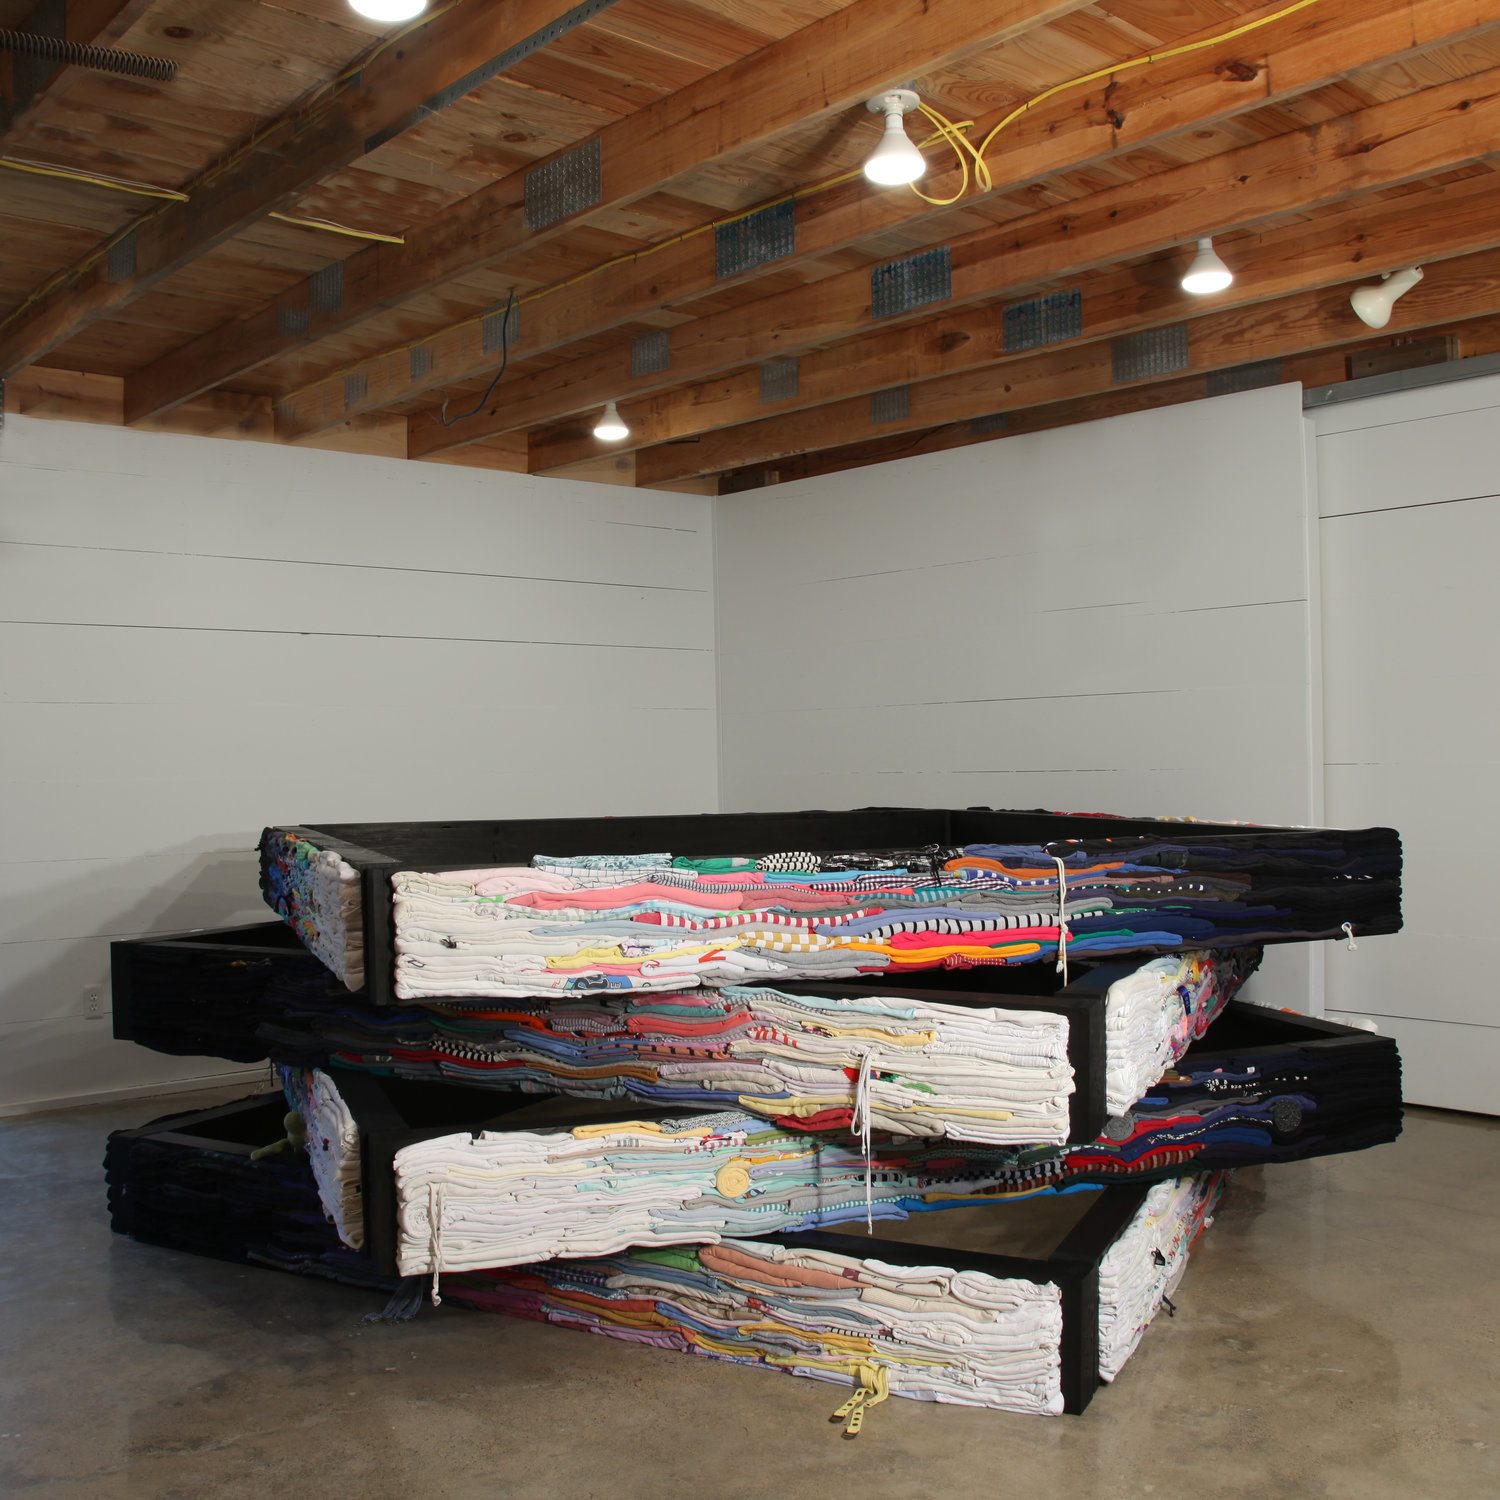 Melander works with used clothing, layered to create unique blends of color and structure.